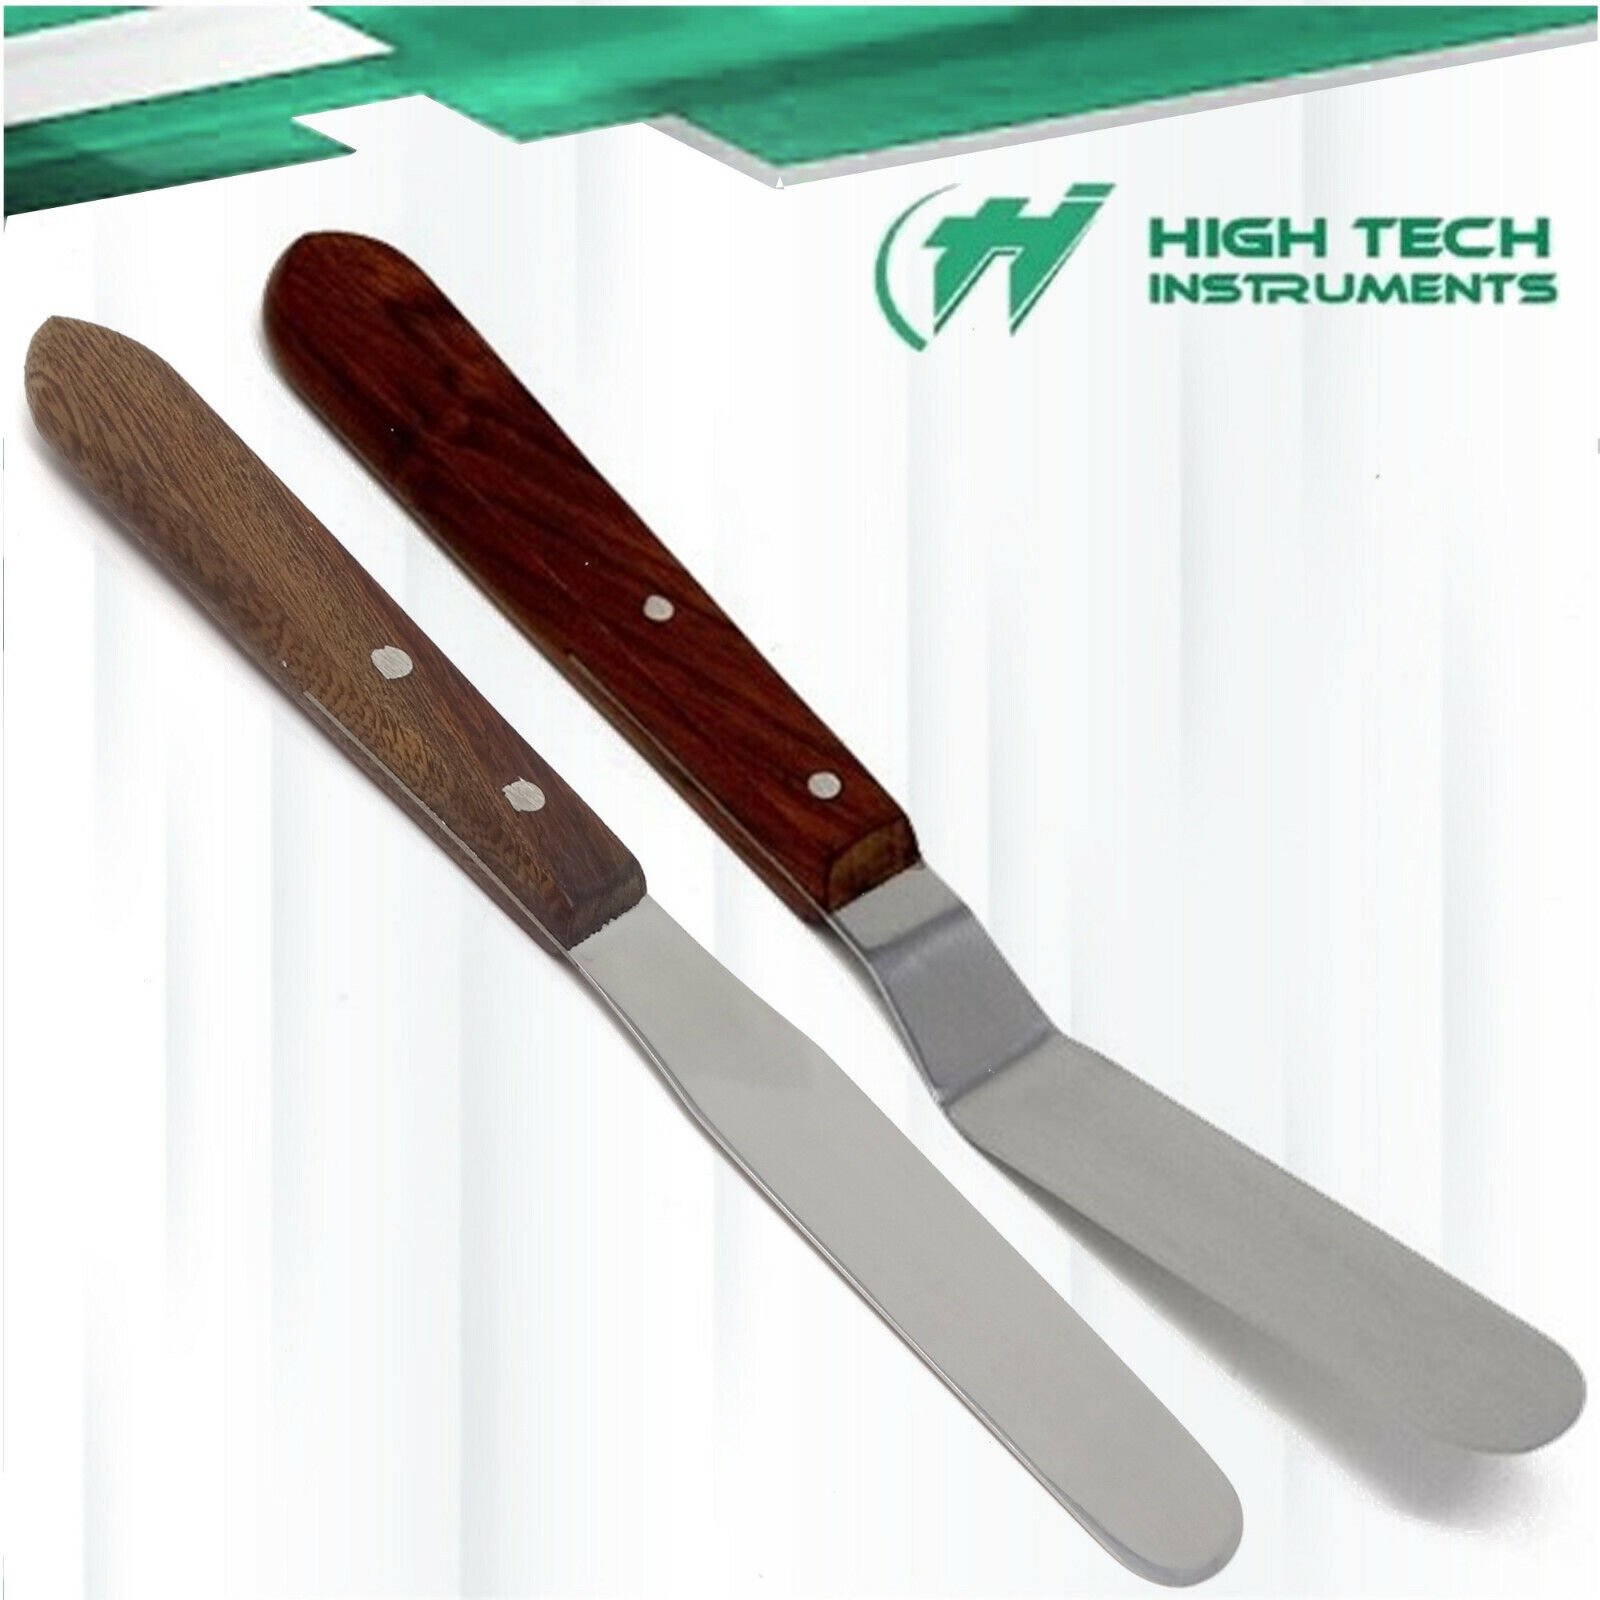 2Pcs Painting Knife Set Mixing Scraper Stainless Steel Palette Art Spatula  hti brand Does Not Apply